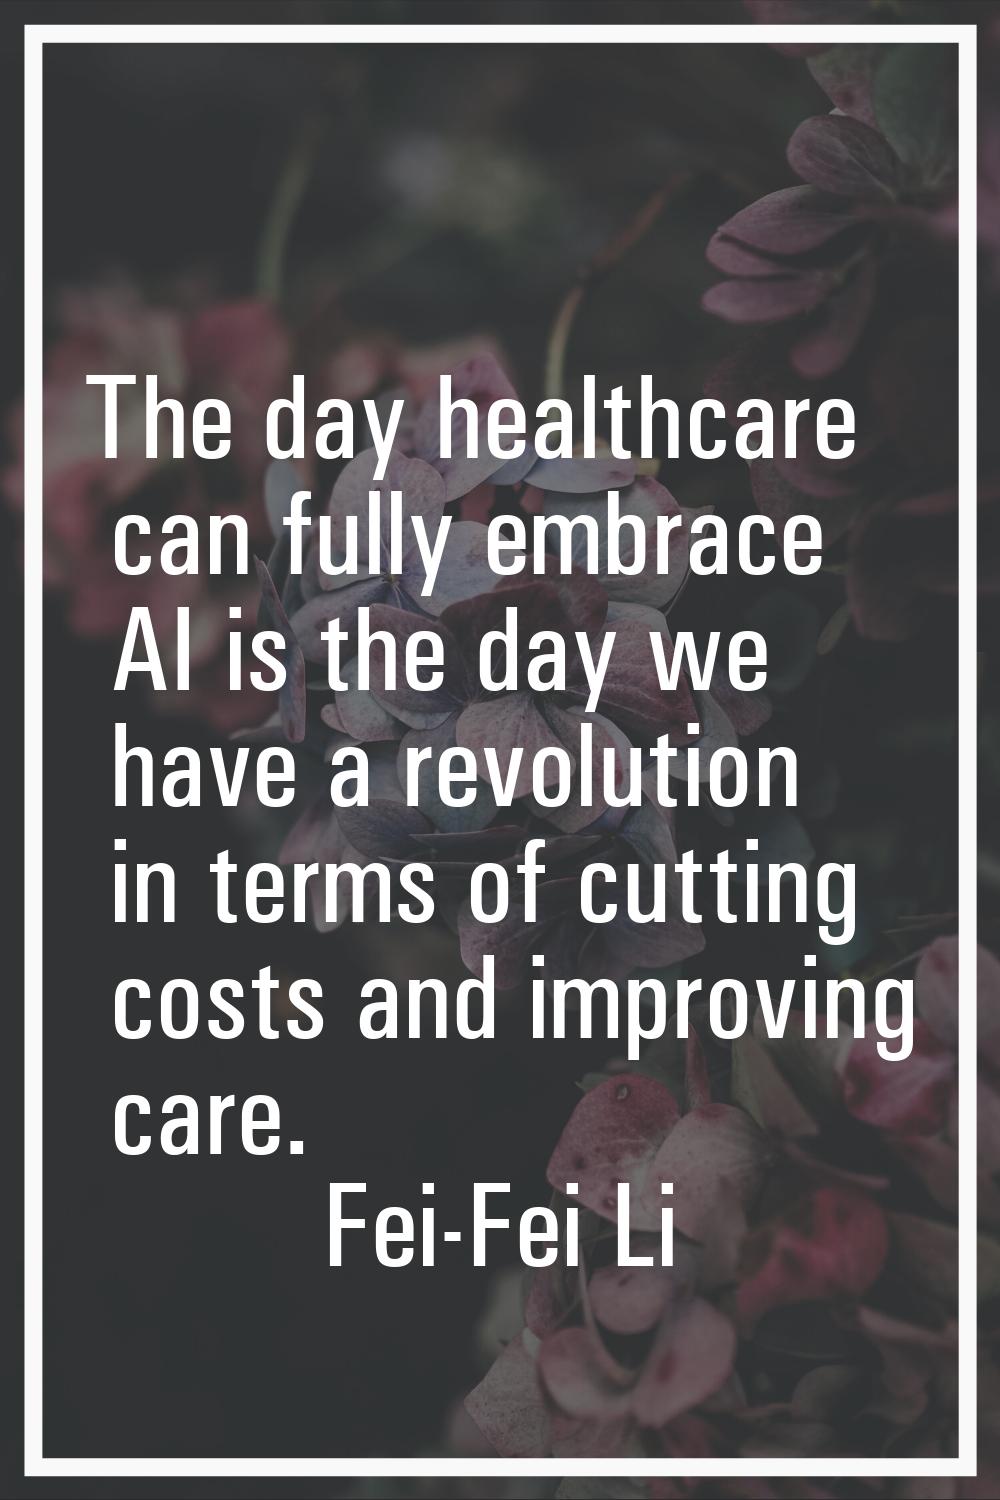 The day healthcare can fully embrace AI is the day we have a revolution in terms of cutting costs a